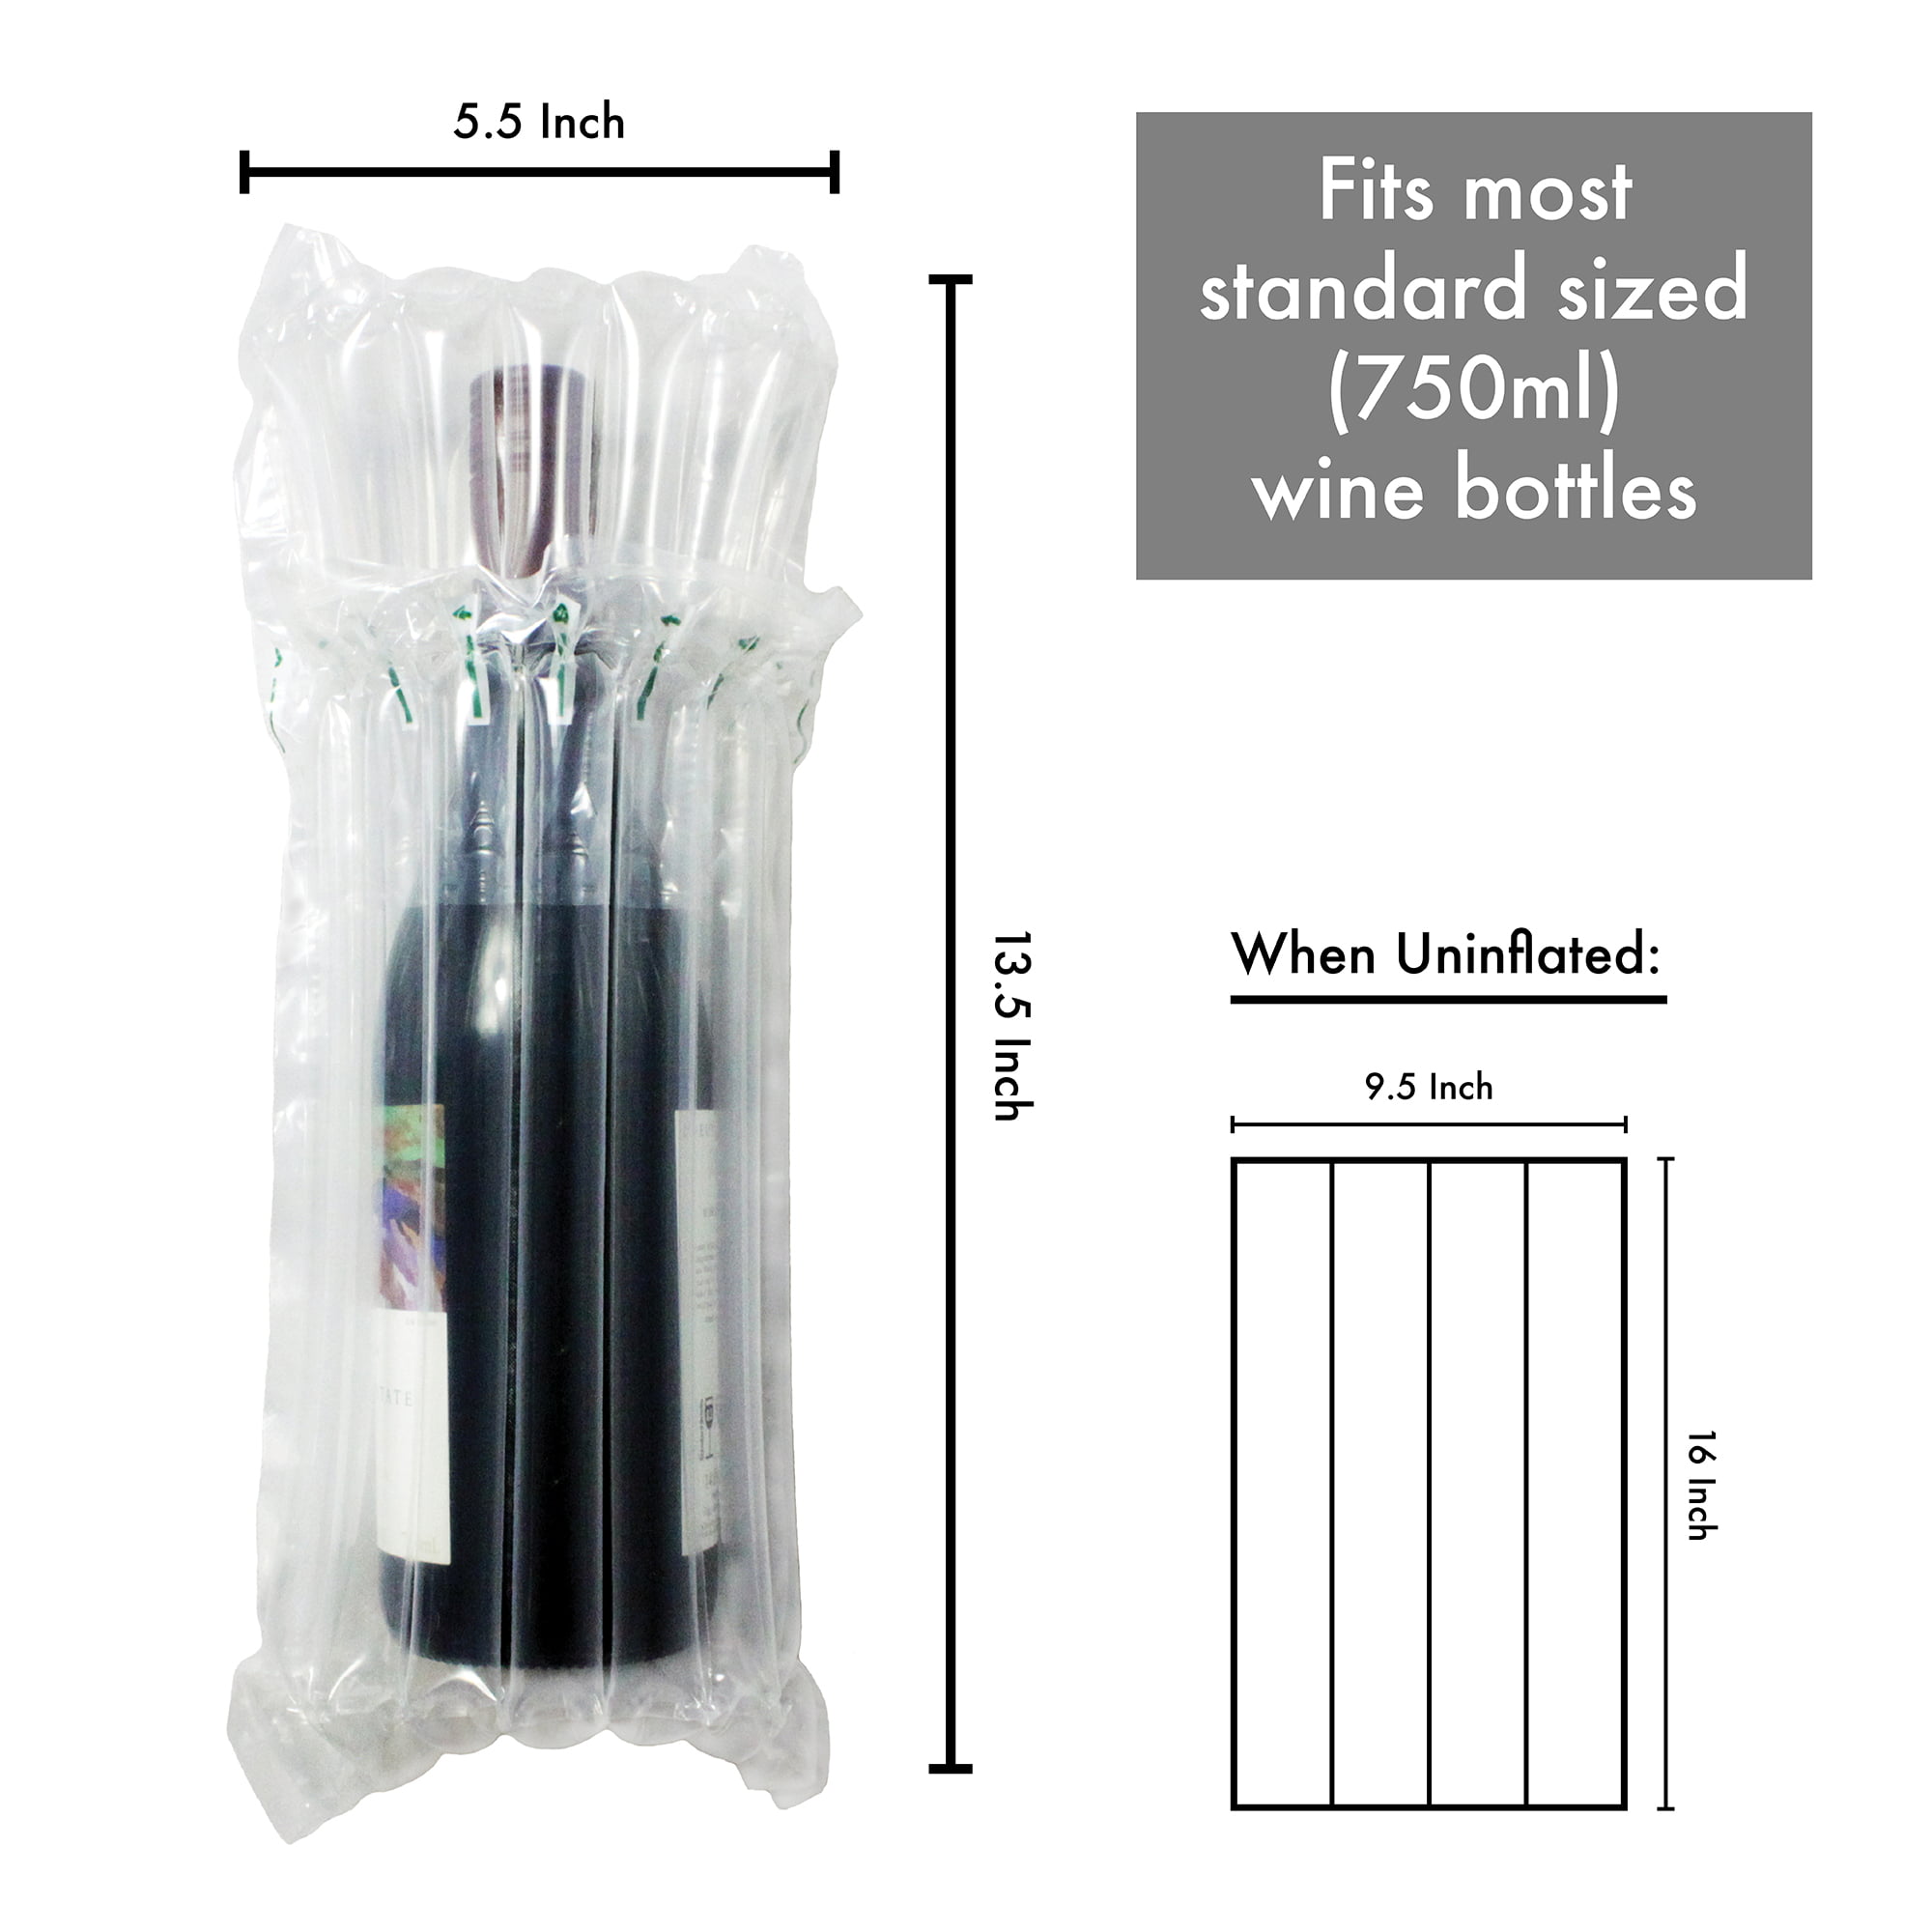 Shipment Inflatable Air Column Cushion Bag for Packing and Safe Transportation of Glass Bottles in Airplane Cushioning 12 pcs Wine Bottle Protector Sleeve for Travel